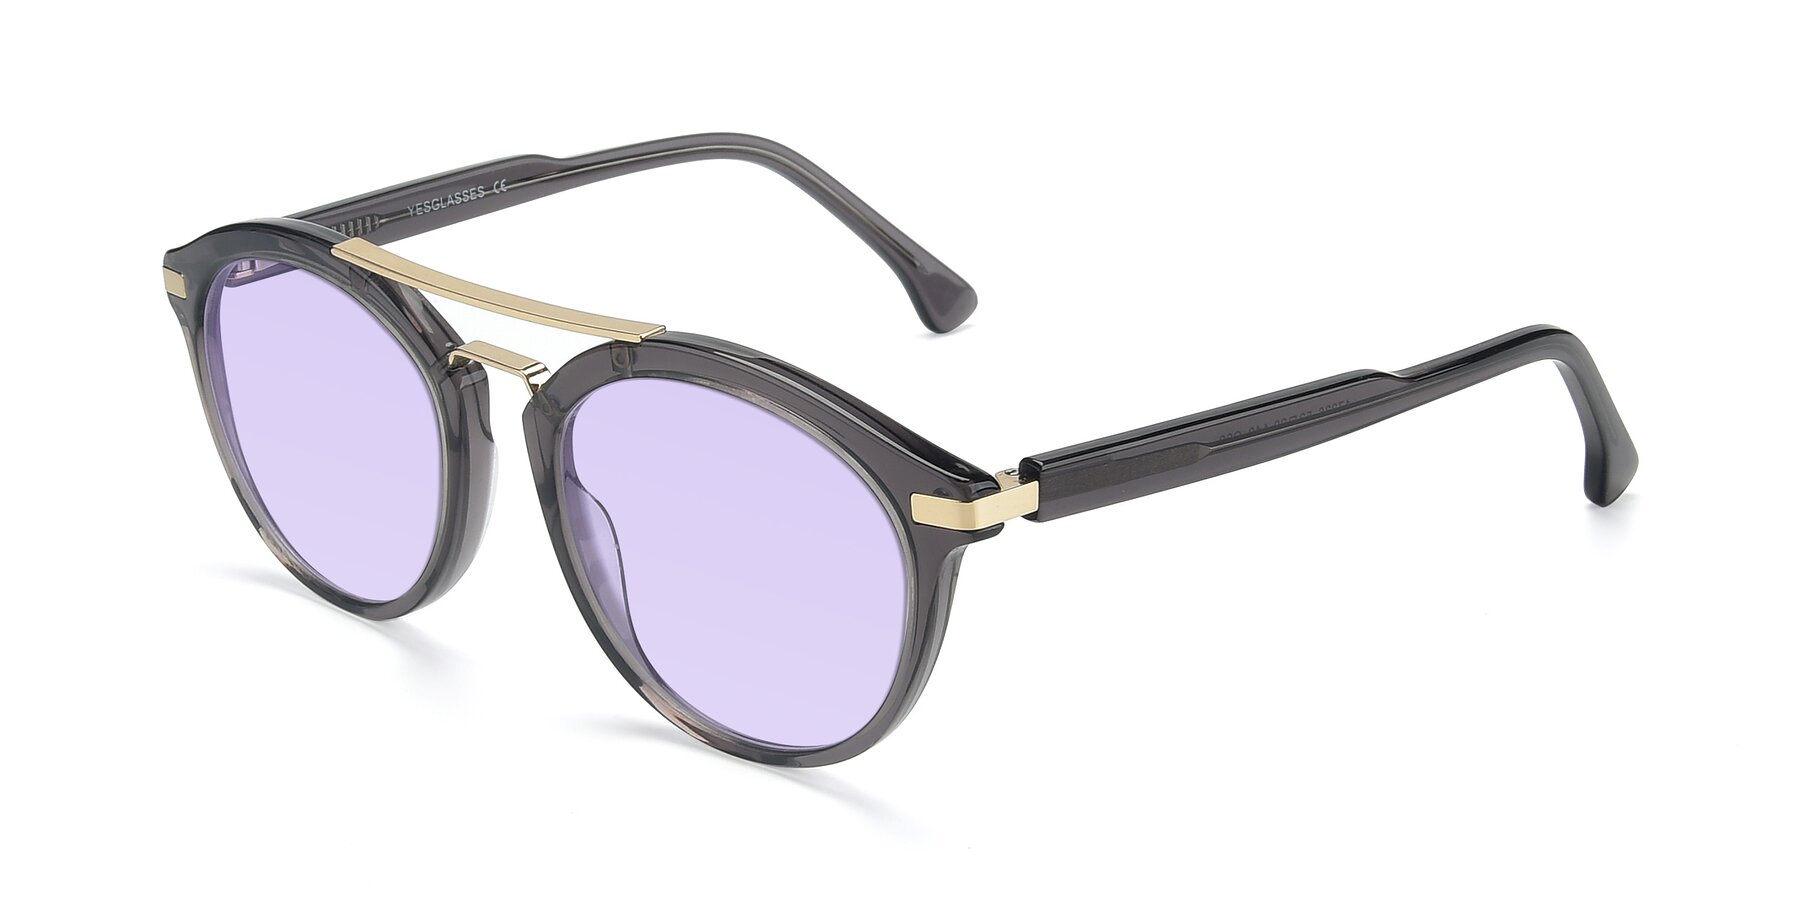 Angle of 17236 in Gray-Gold with Light Purple Tinted Lenses